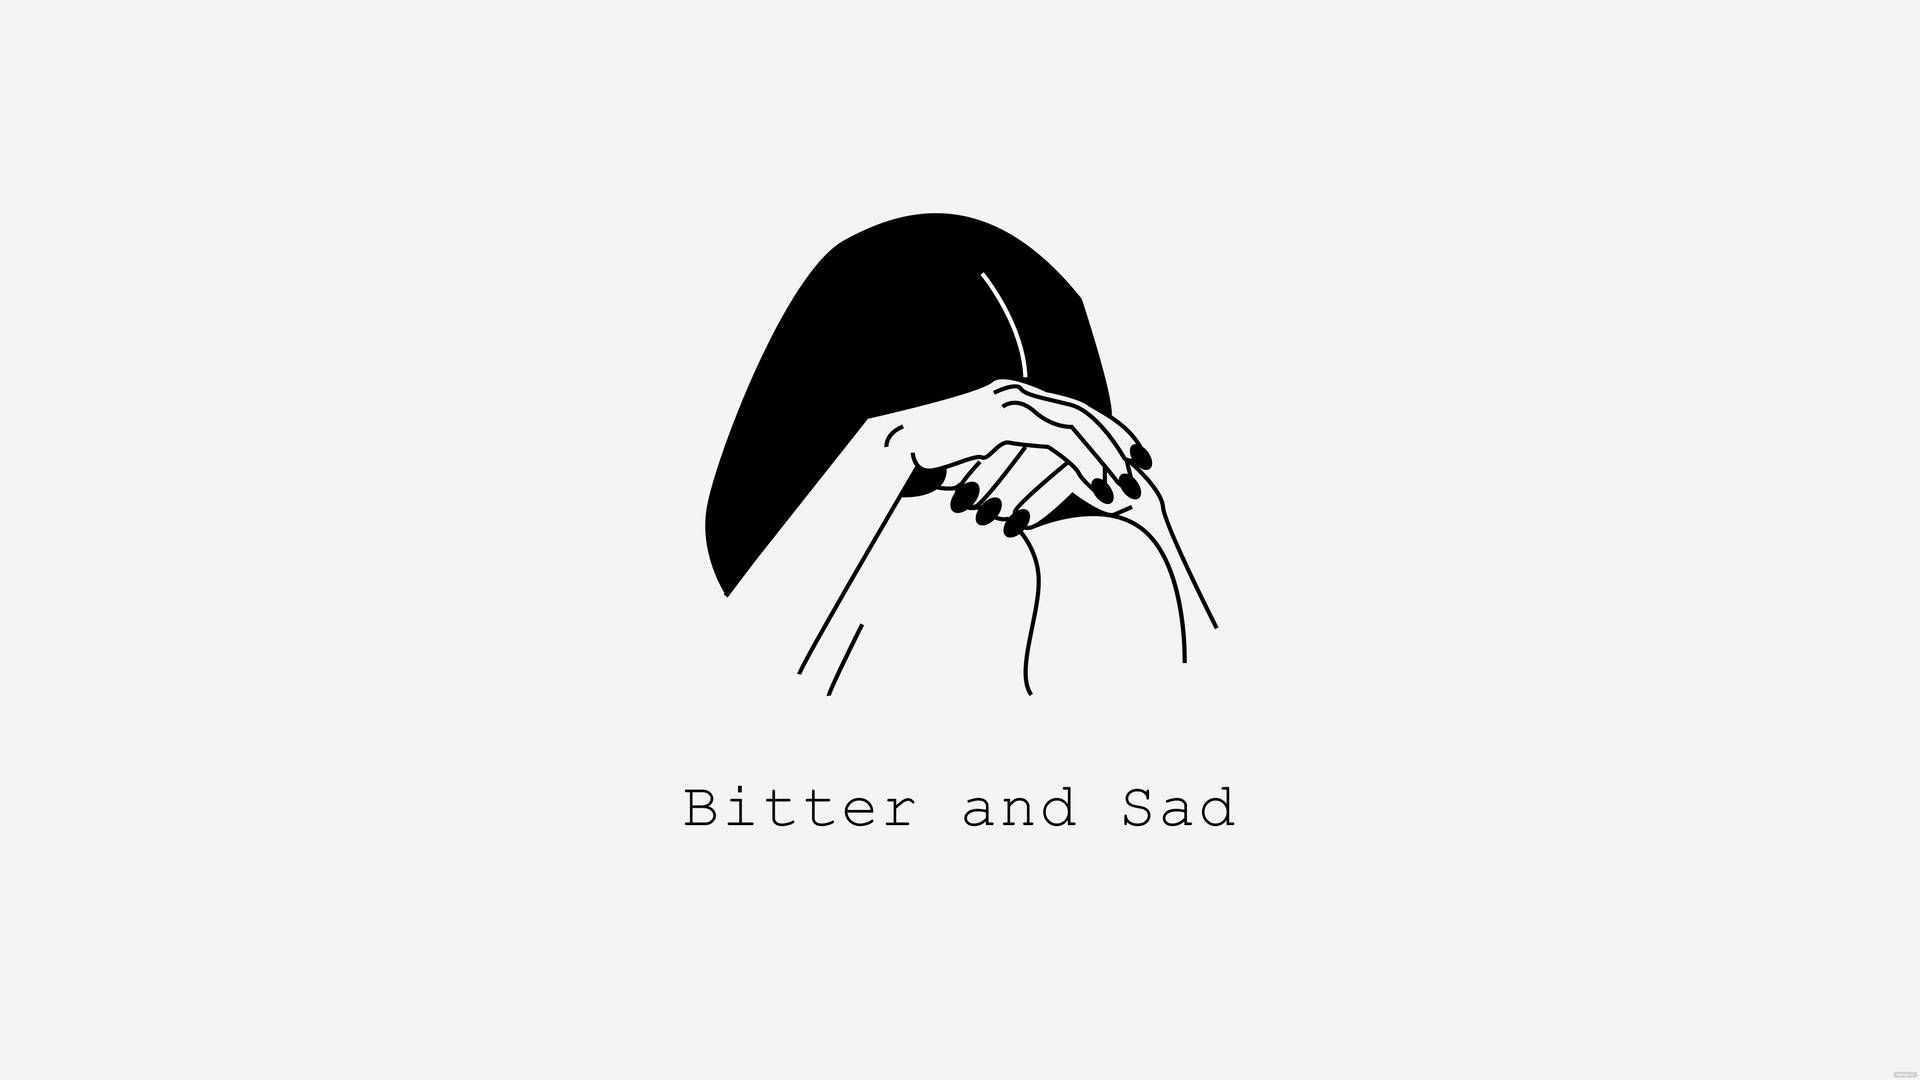 Free Sad Aesthetic Quote Wallpaper Downloads, Sad Aesthetic Quote Wallpaper for FREE